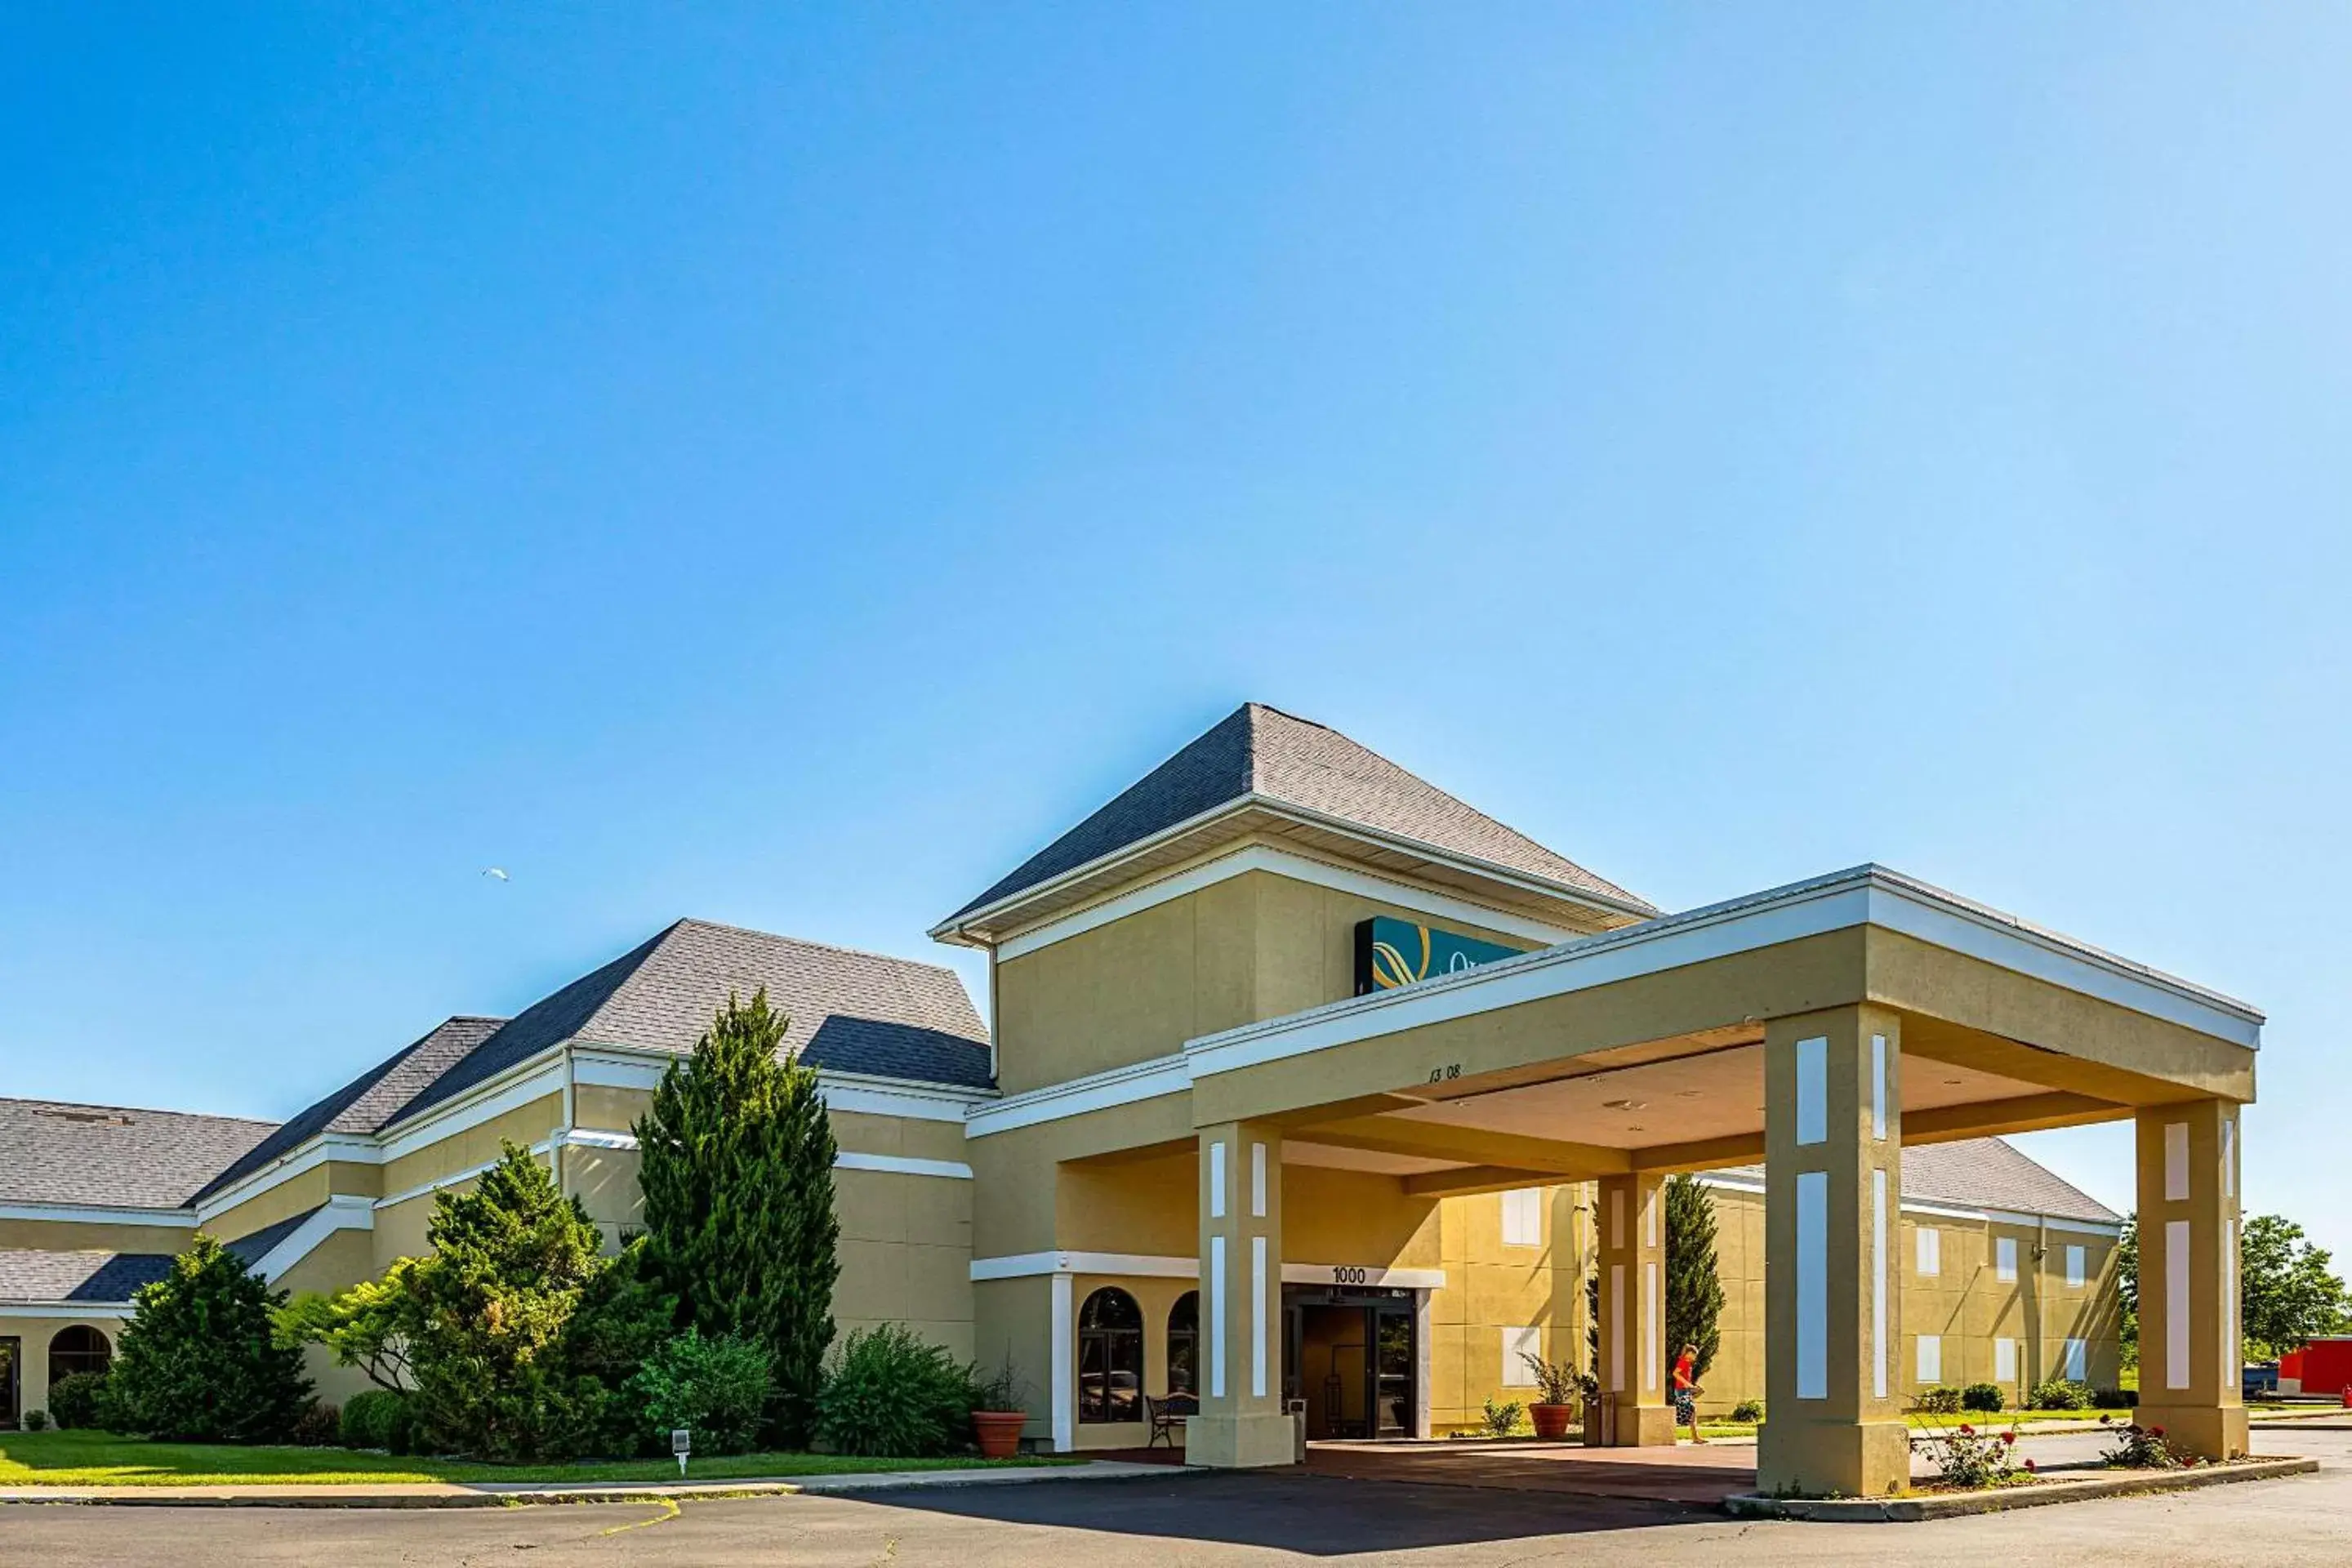 Property Building in Quality Inn & Suites Coldwater near I-69